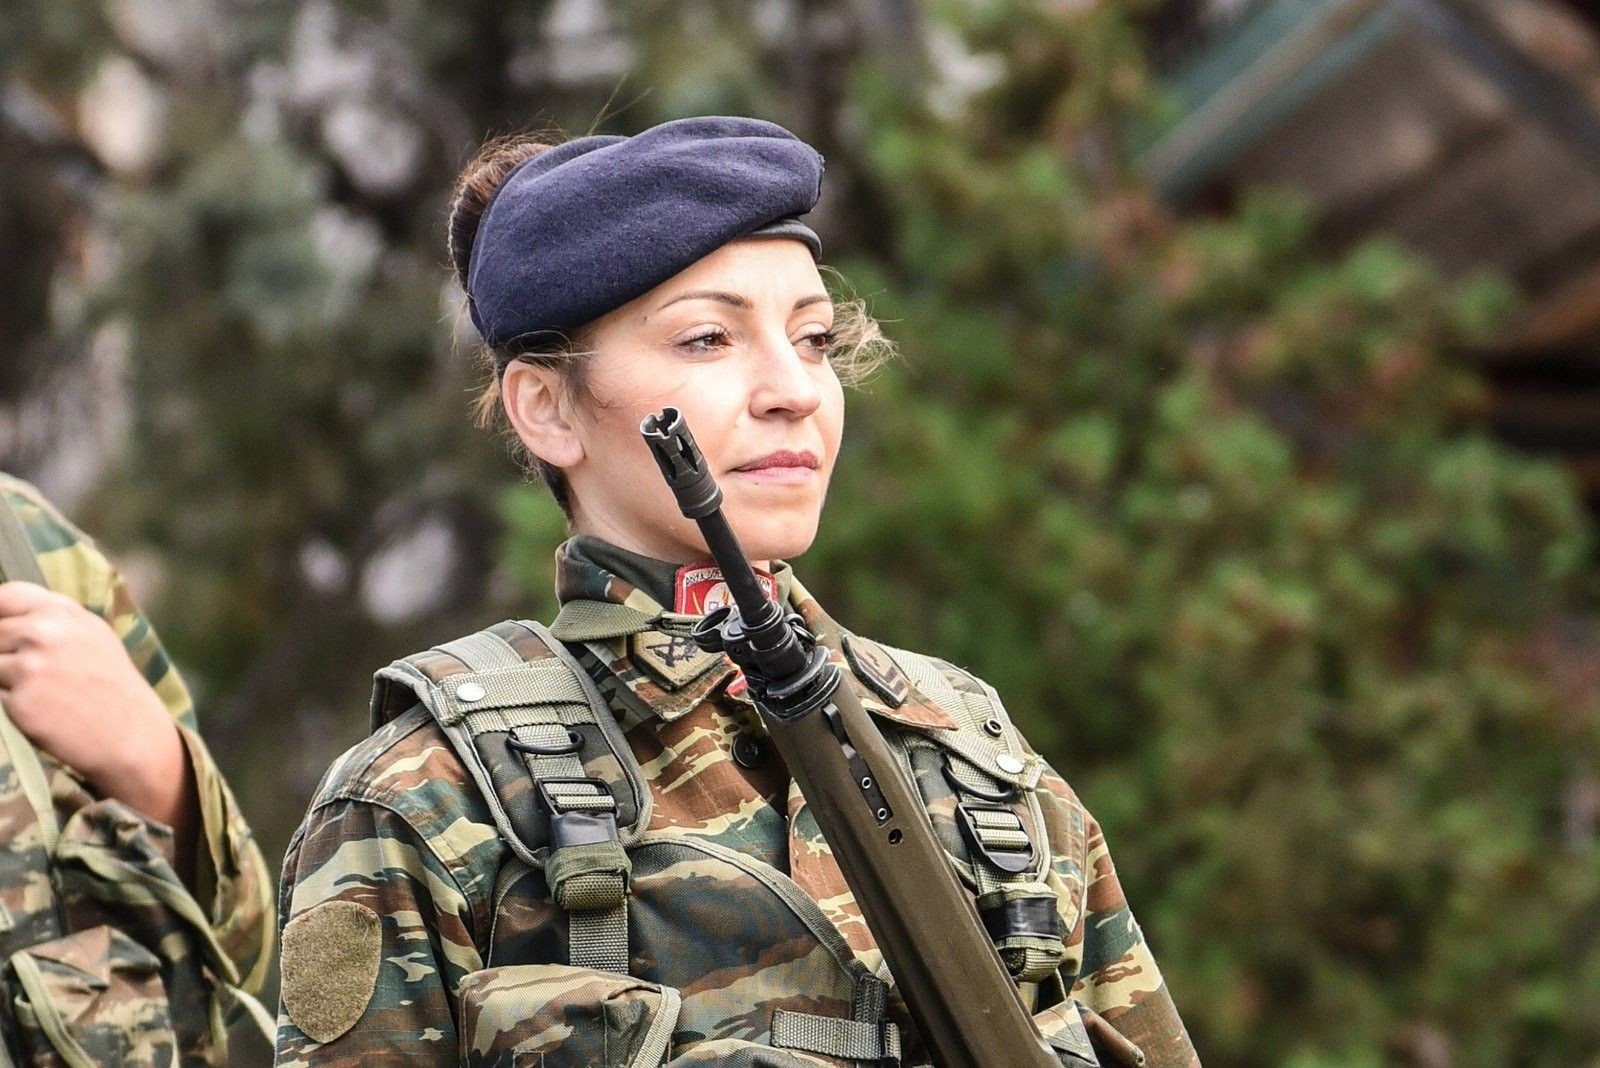 Top 10 Countries With The Most Beautiful Female Soldiers in 2023/24